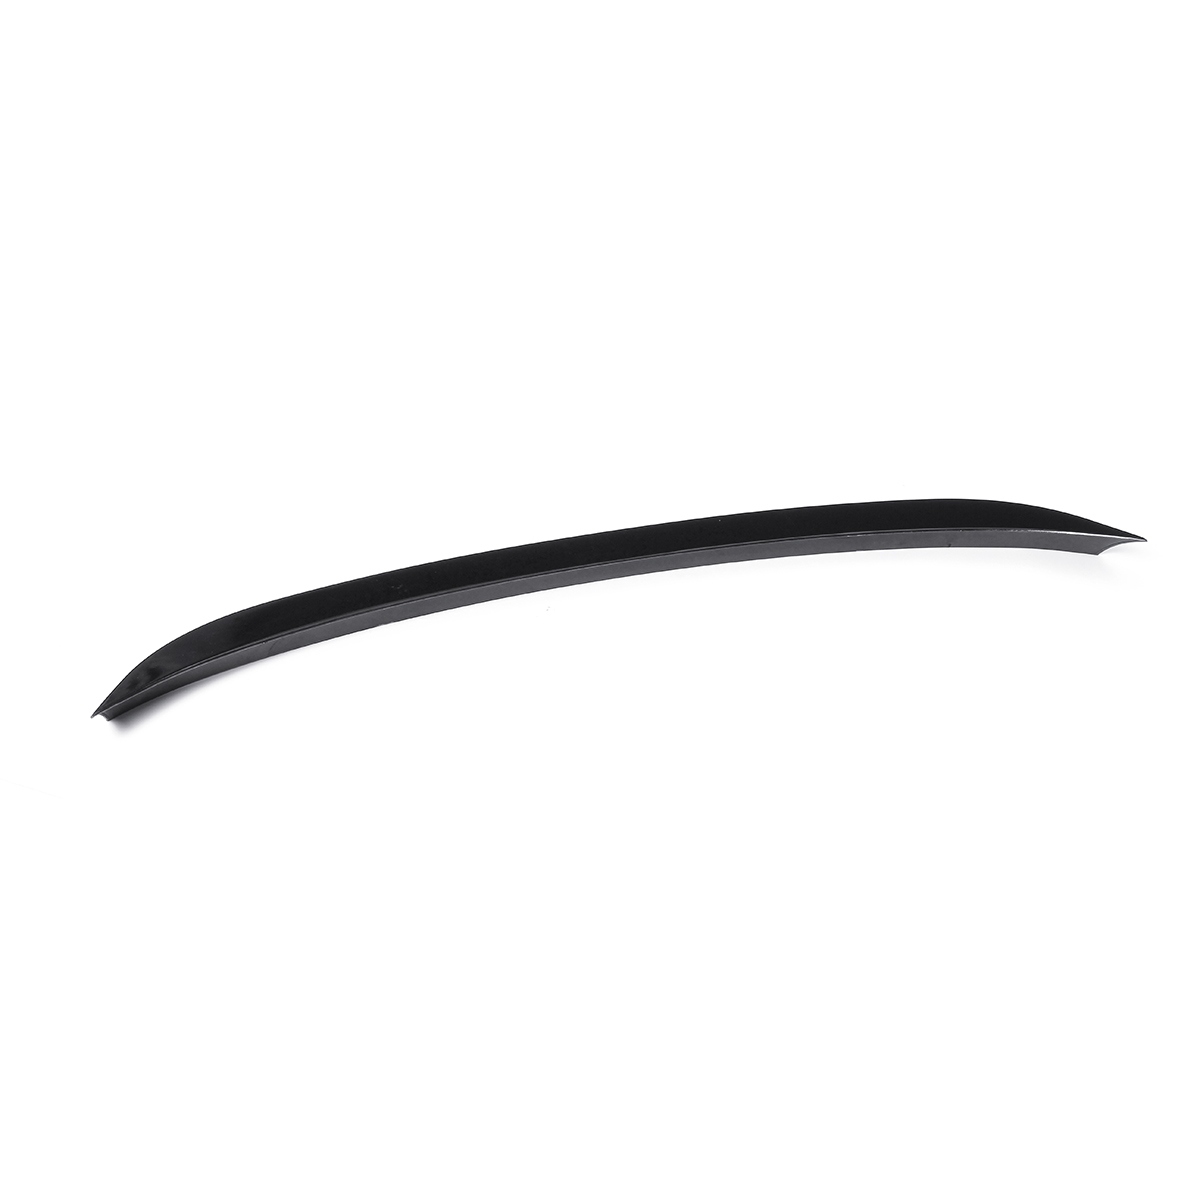 ABS-OE-Type-Rear-Trunk-Spoiler-Wing-Painted-Glossy-Black-For-BMW-E90-3-series-Sedan-2005-2011-1697915